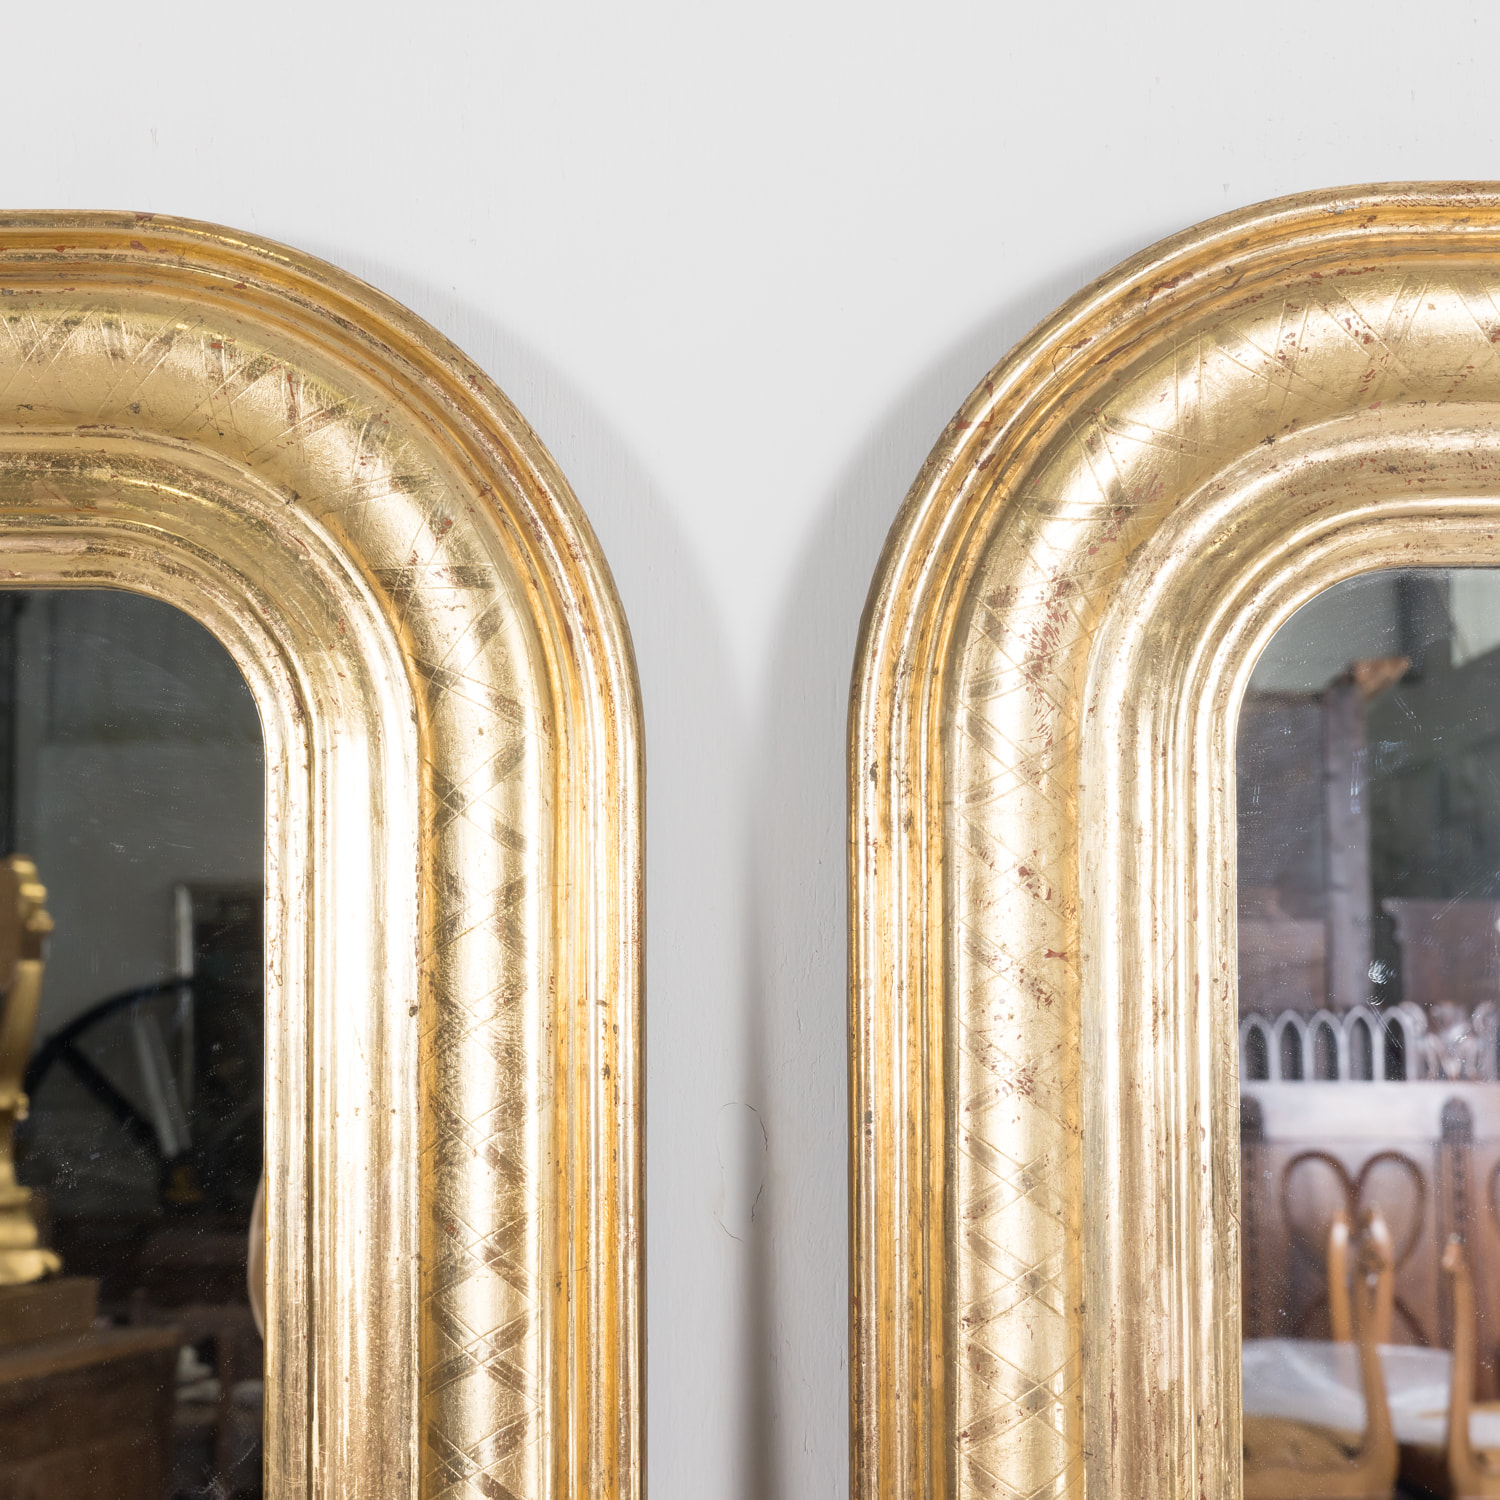 A Louis-Philippe Mirror - Making it Lovely